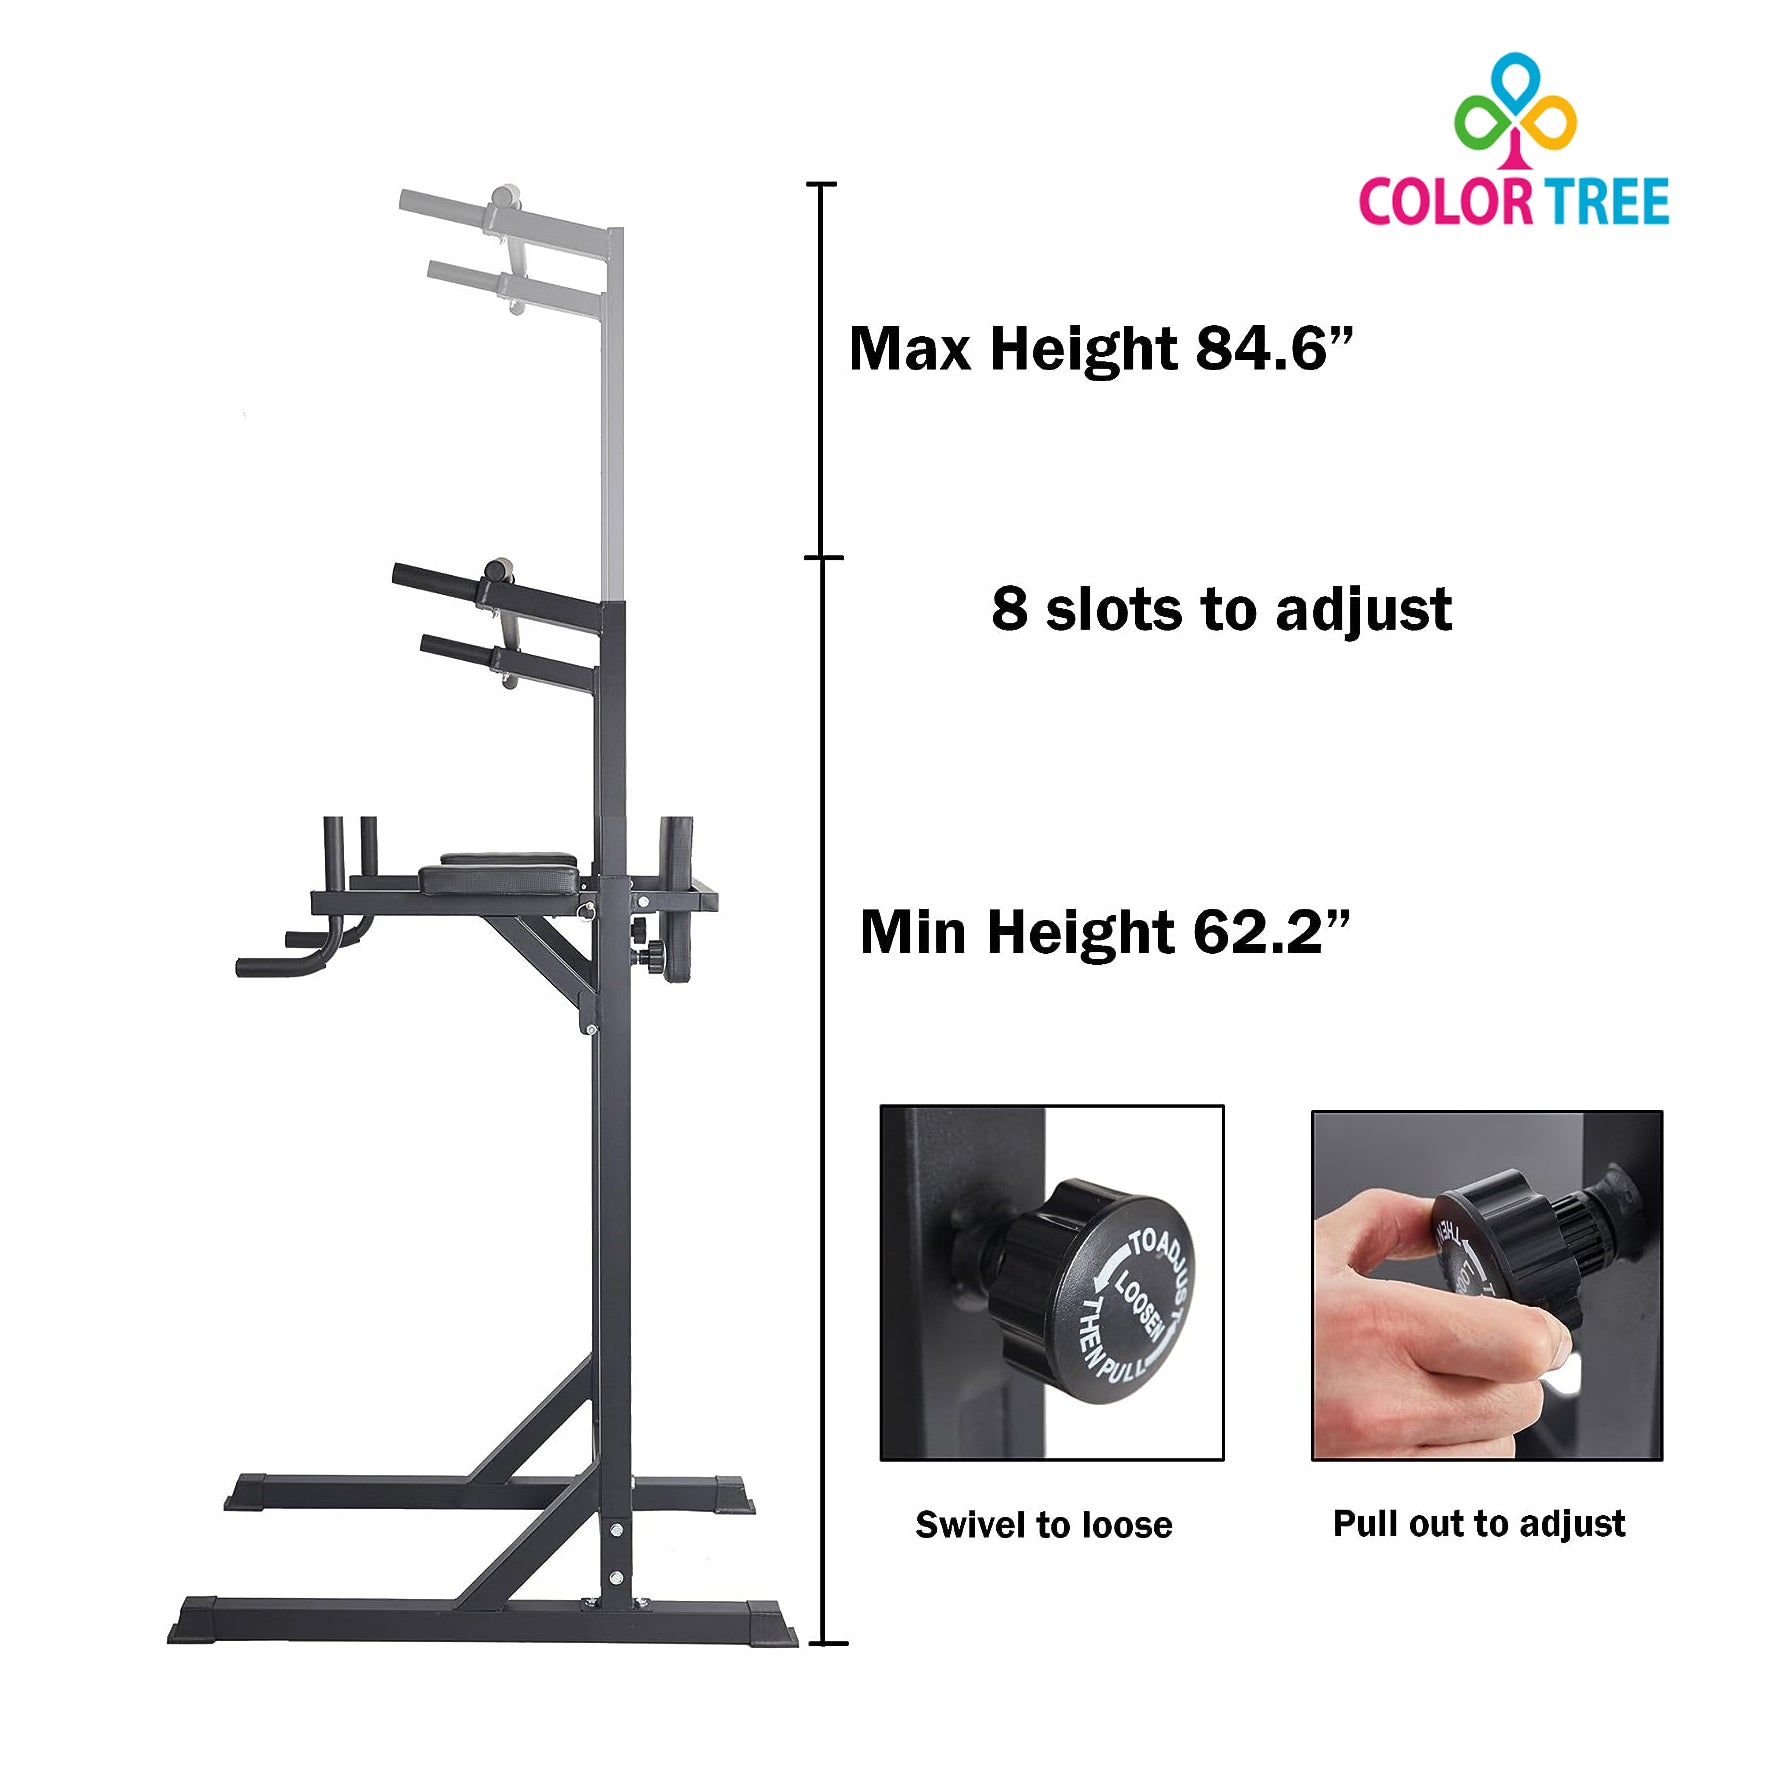 COLOR TREE Pull Up Dip Bar Body-building, Adjustable Dip Station, Multi-Function Power Tower Calisthenics Equipment For Home Gym